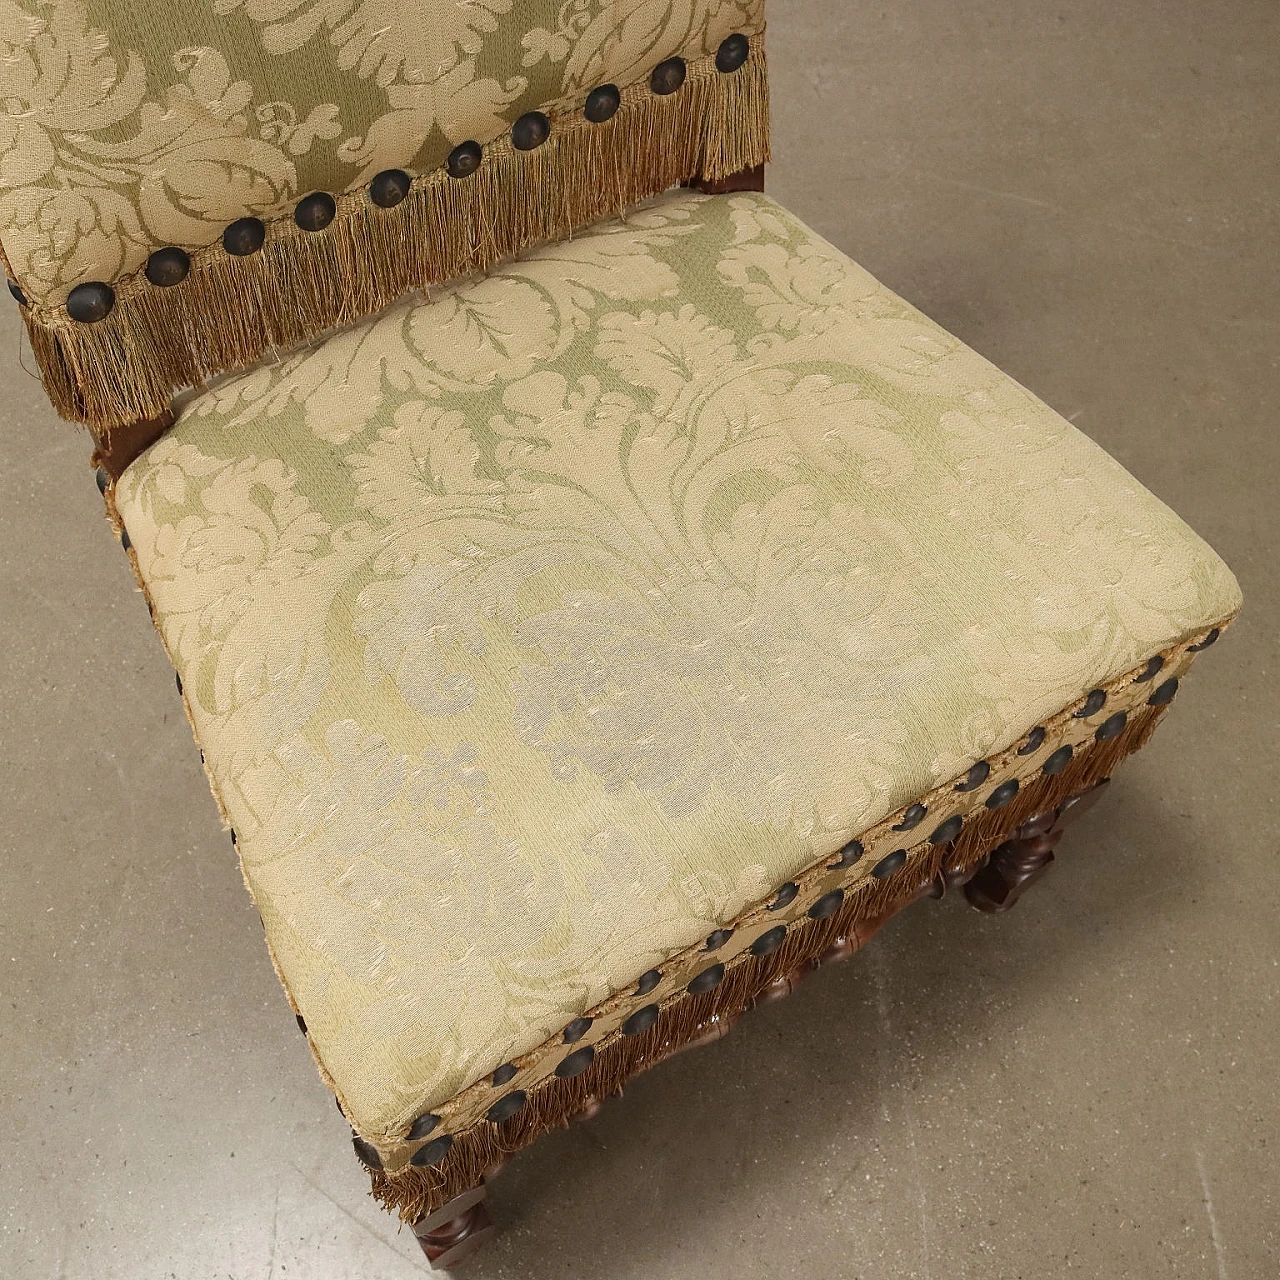 4 Wooden chairs with bobbin legs and brocade fabric, 19th century 8